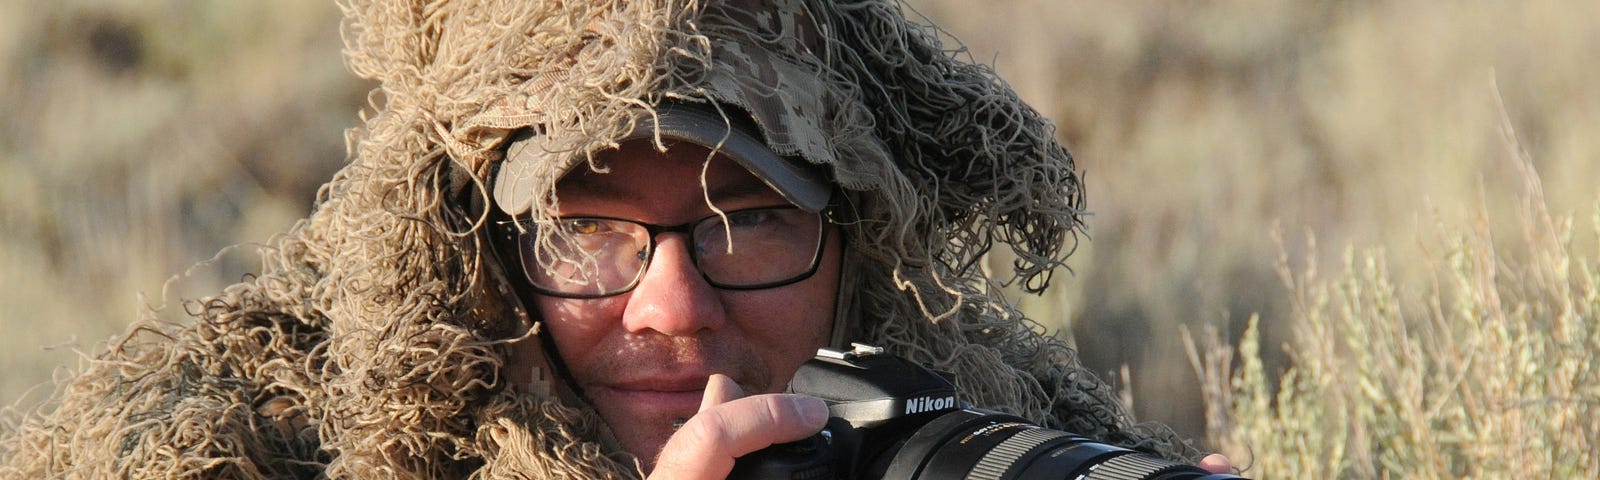 Tom Koerner, in his camoflauge ghillie suit, is one with his surroundings.